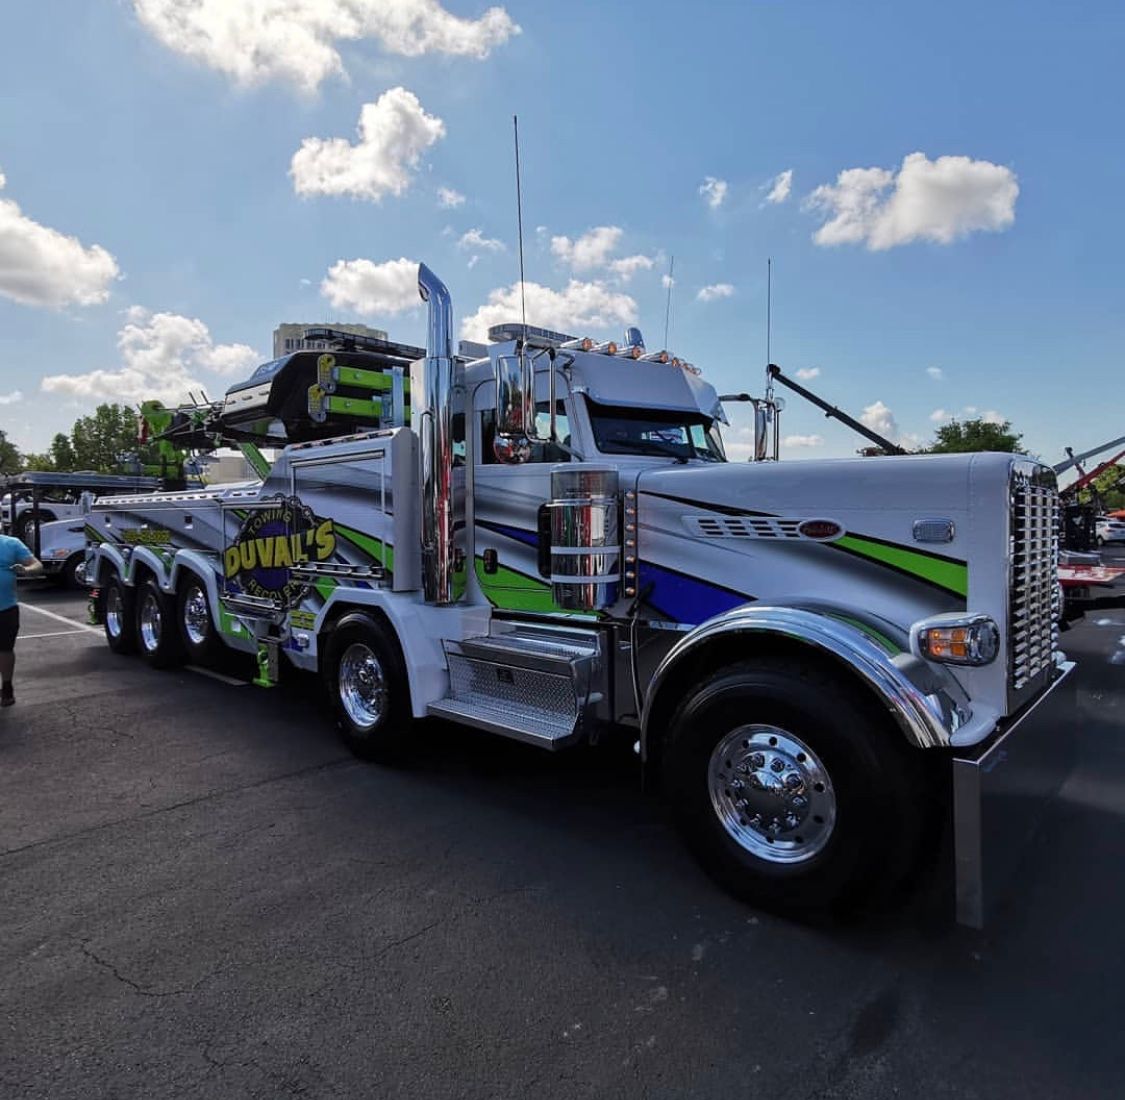 Services & Products Duval's Towing & Garage in Goffstown NH